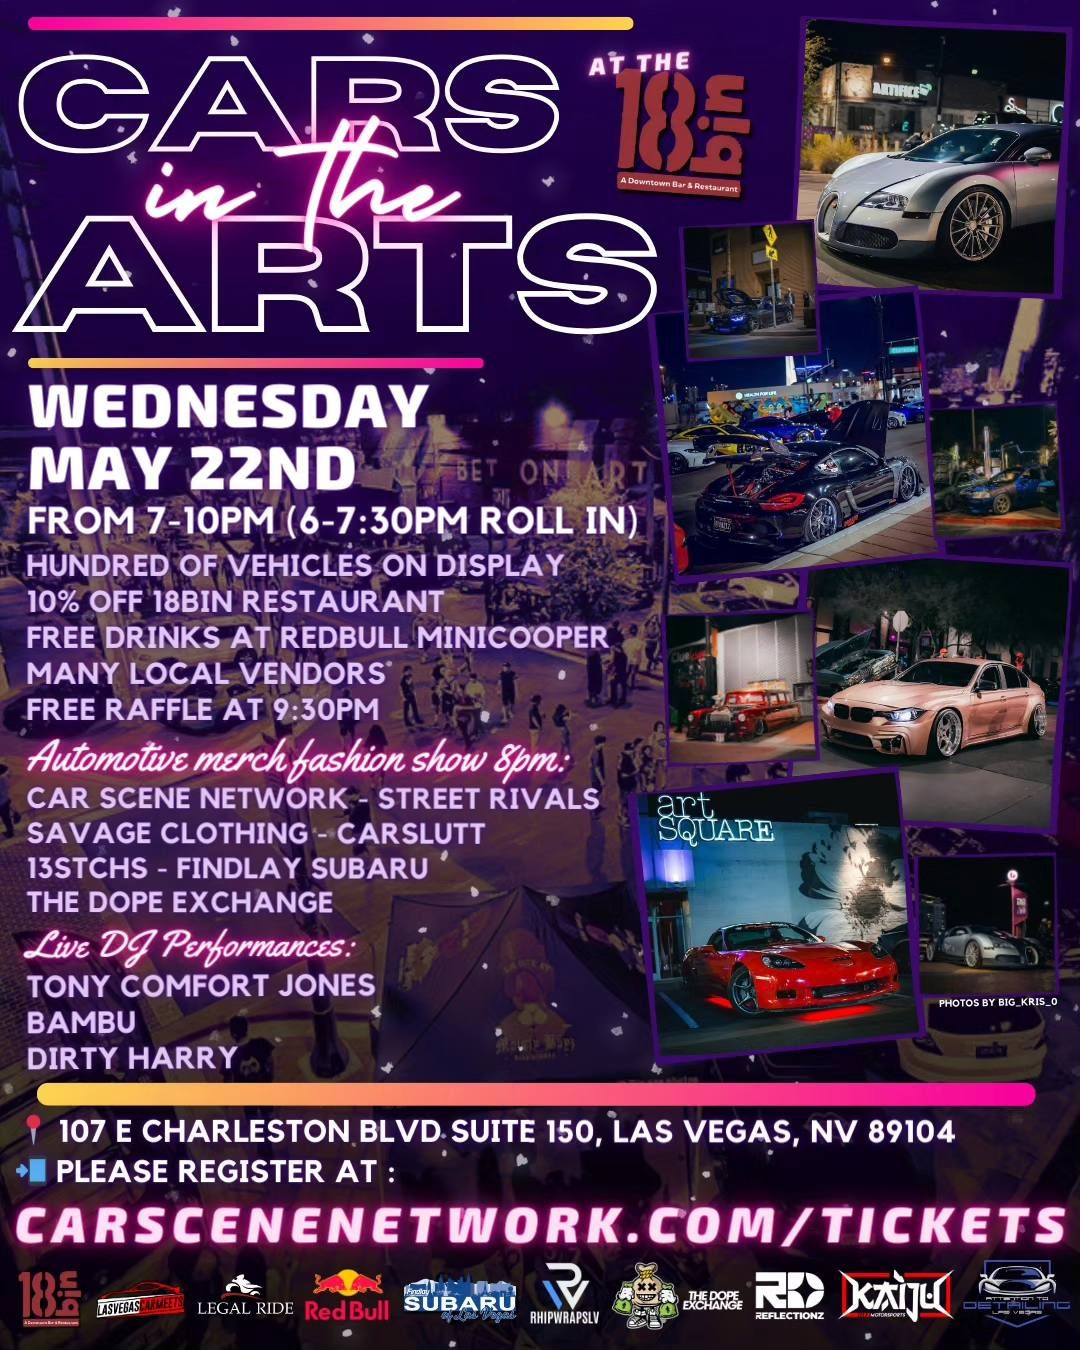 Cars in the Arts + Automotive apparel fashion show